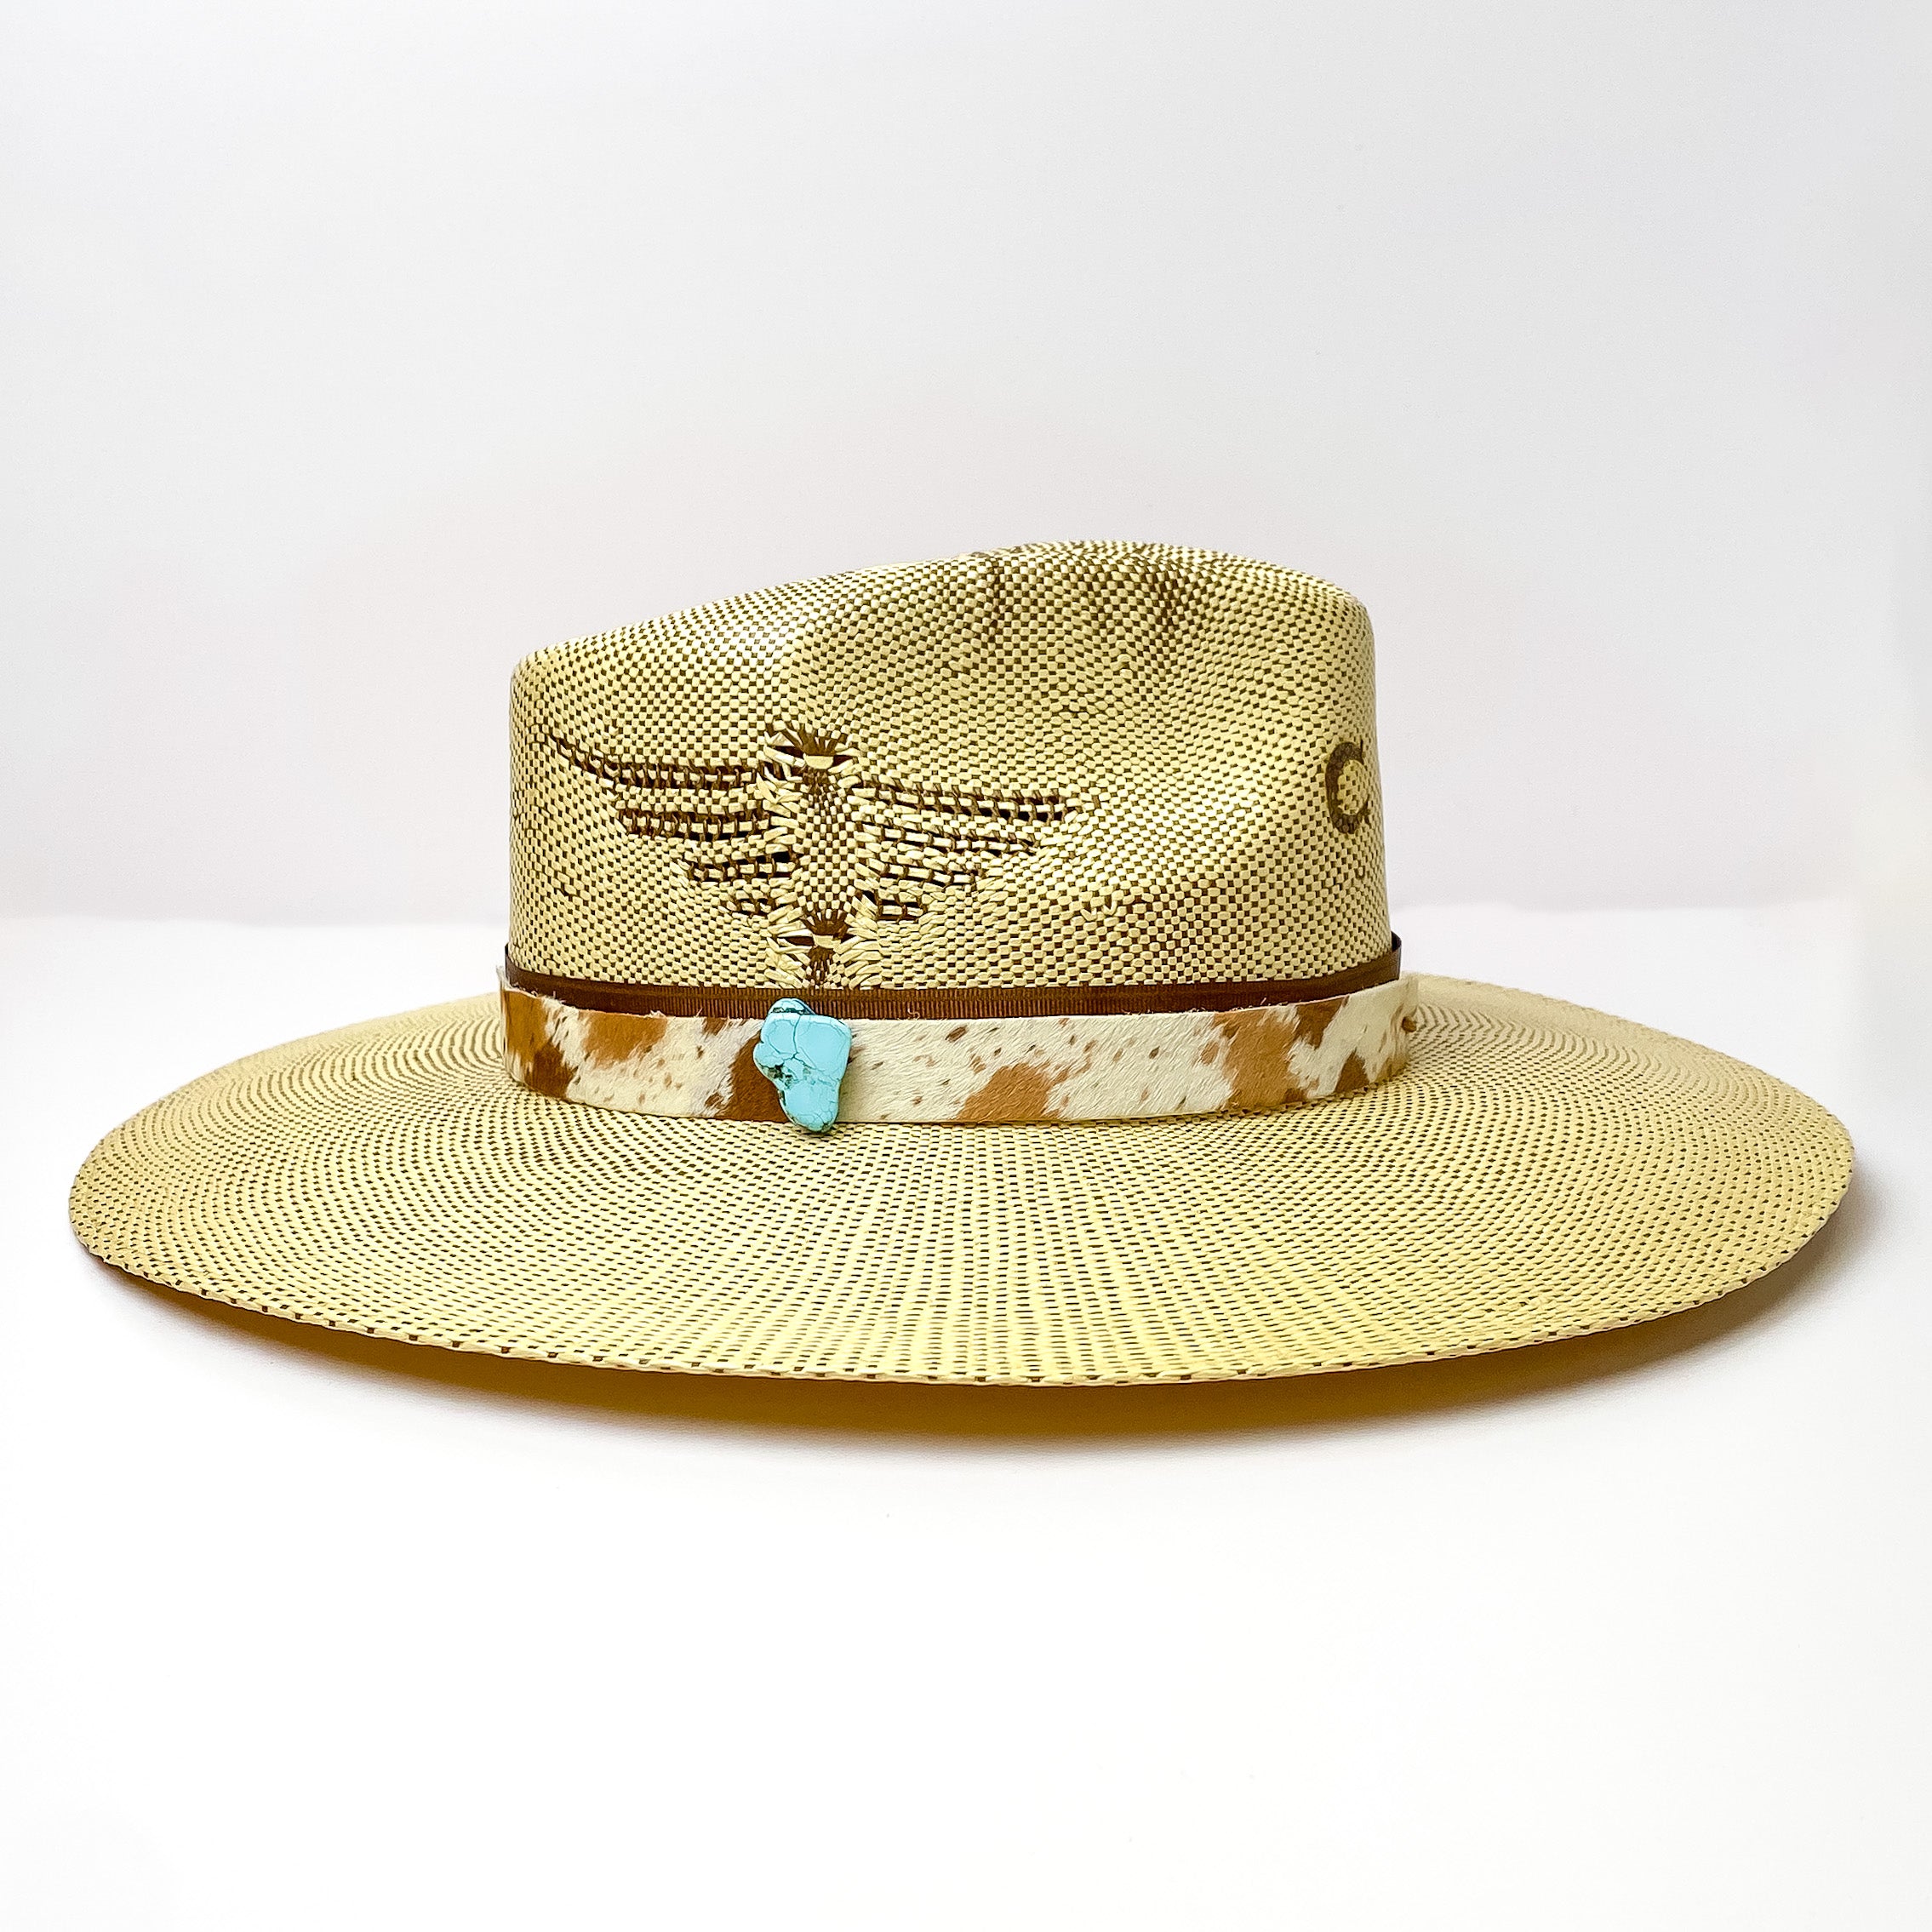 Cow Print Hat Band with Faux Turquoise Charm in Brown, Tan, and Ivory - Giddy Up Glamour Boutique